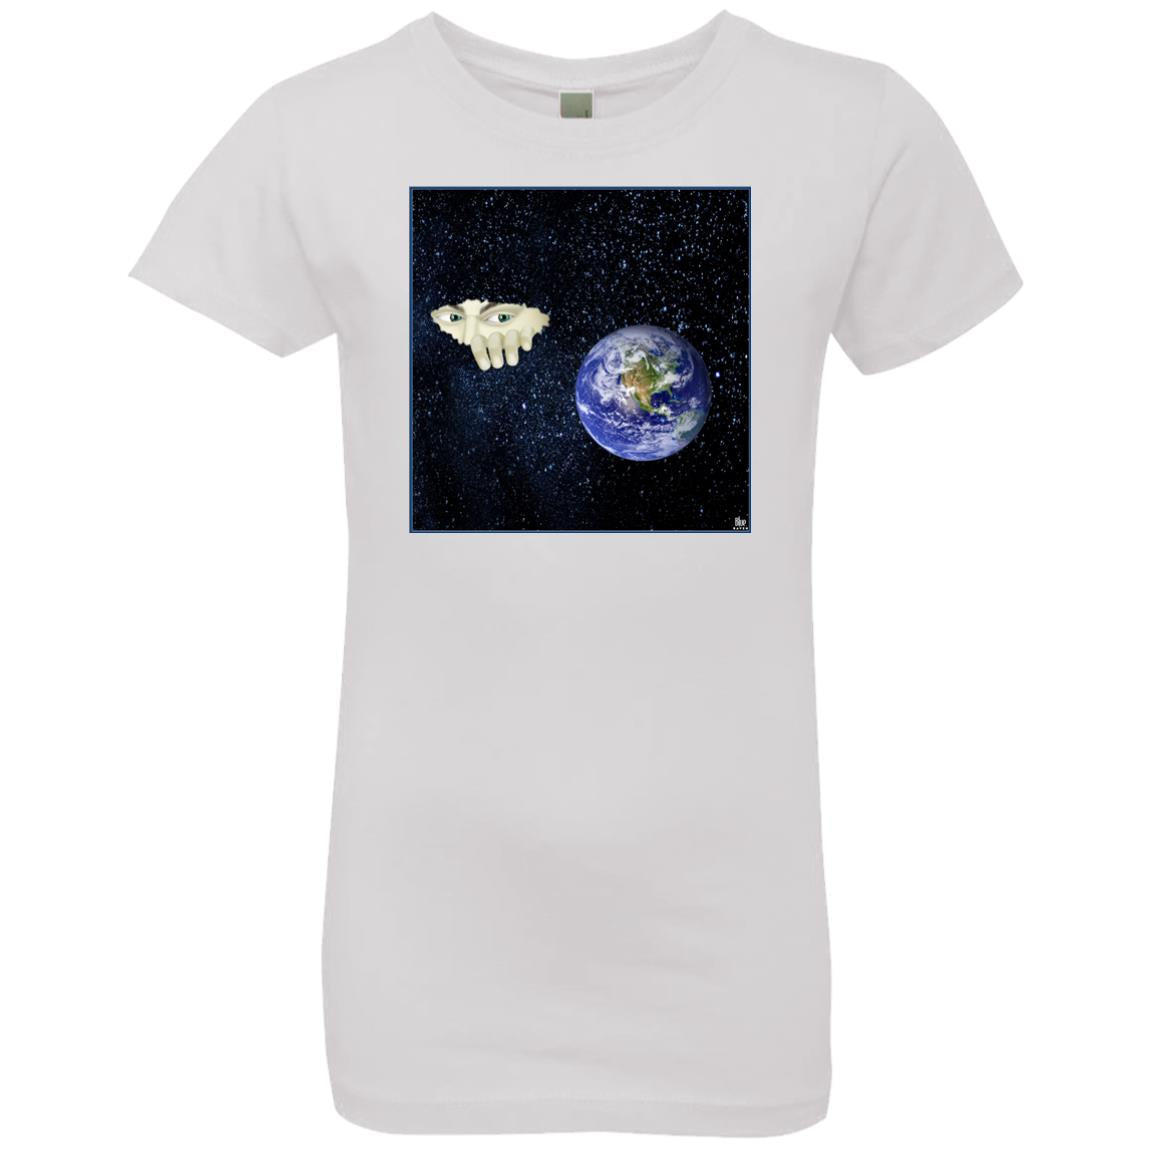 SOMEWHERE OUT THERE - Girl's Premium Cotton T-Shirt